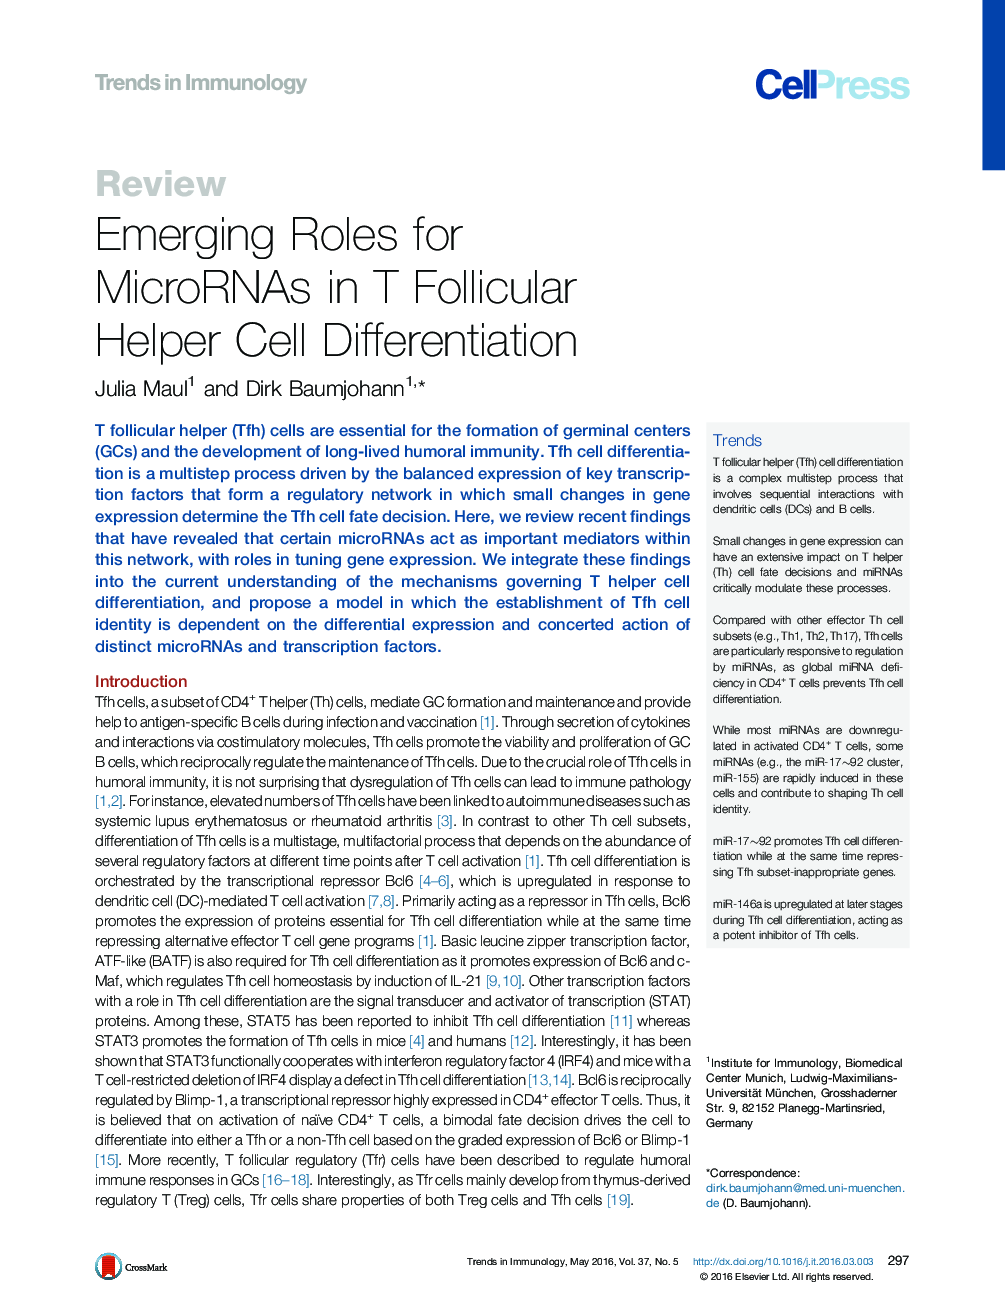 Emerging Roles for MicroRNAs in T Follicular Helper Cell Differentiation